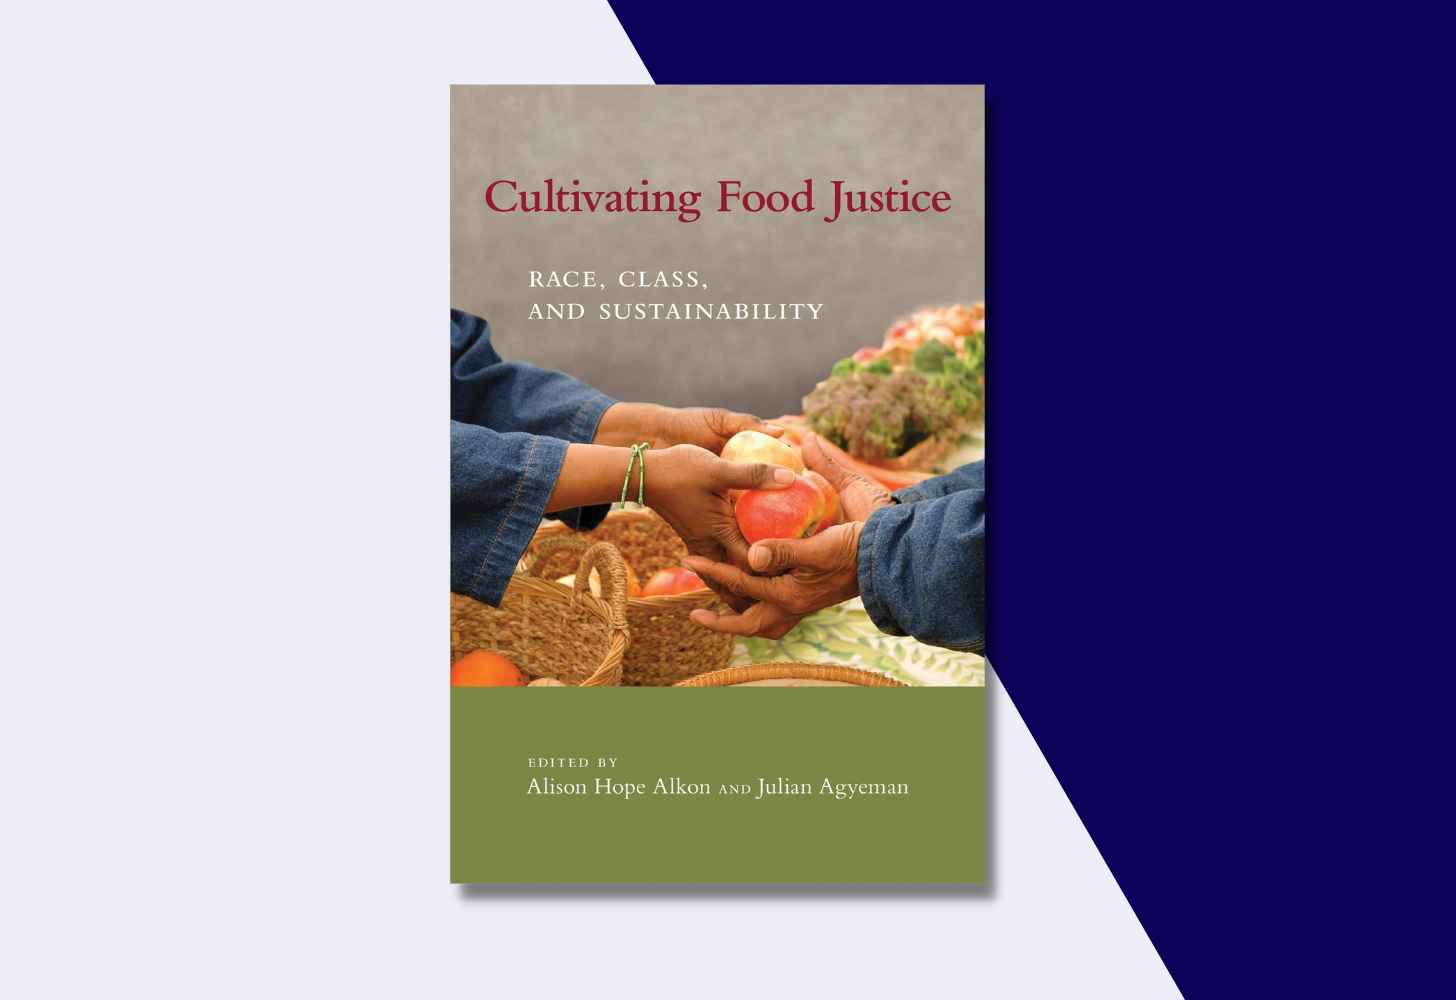 The Cover Of “Cultivating Food Justice: Race, Class, and Sustainability (Food, Health, and the Environment)” edited by Alison Hope Alkon and Julian Agyeman